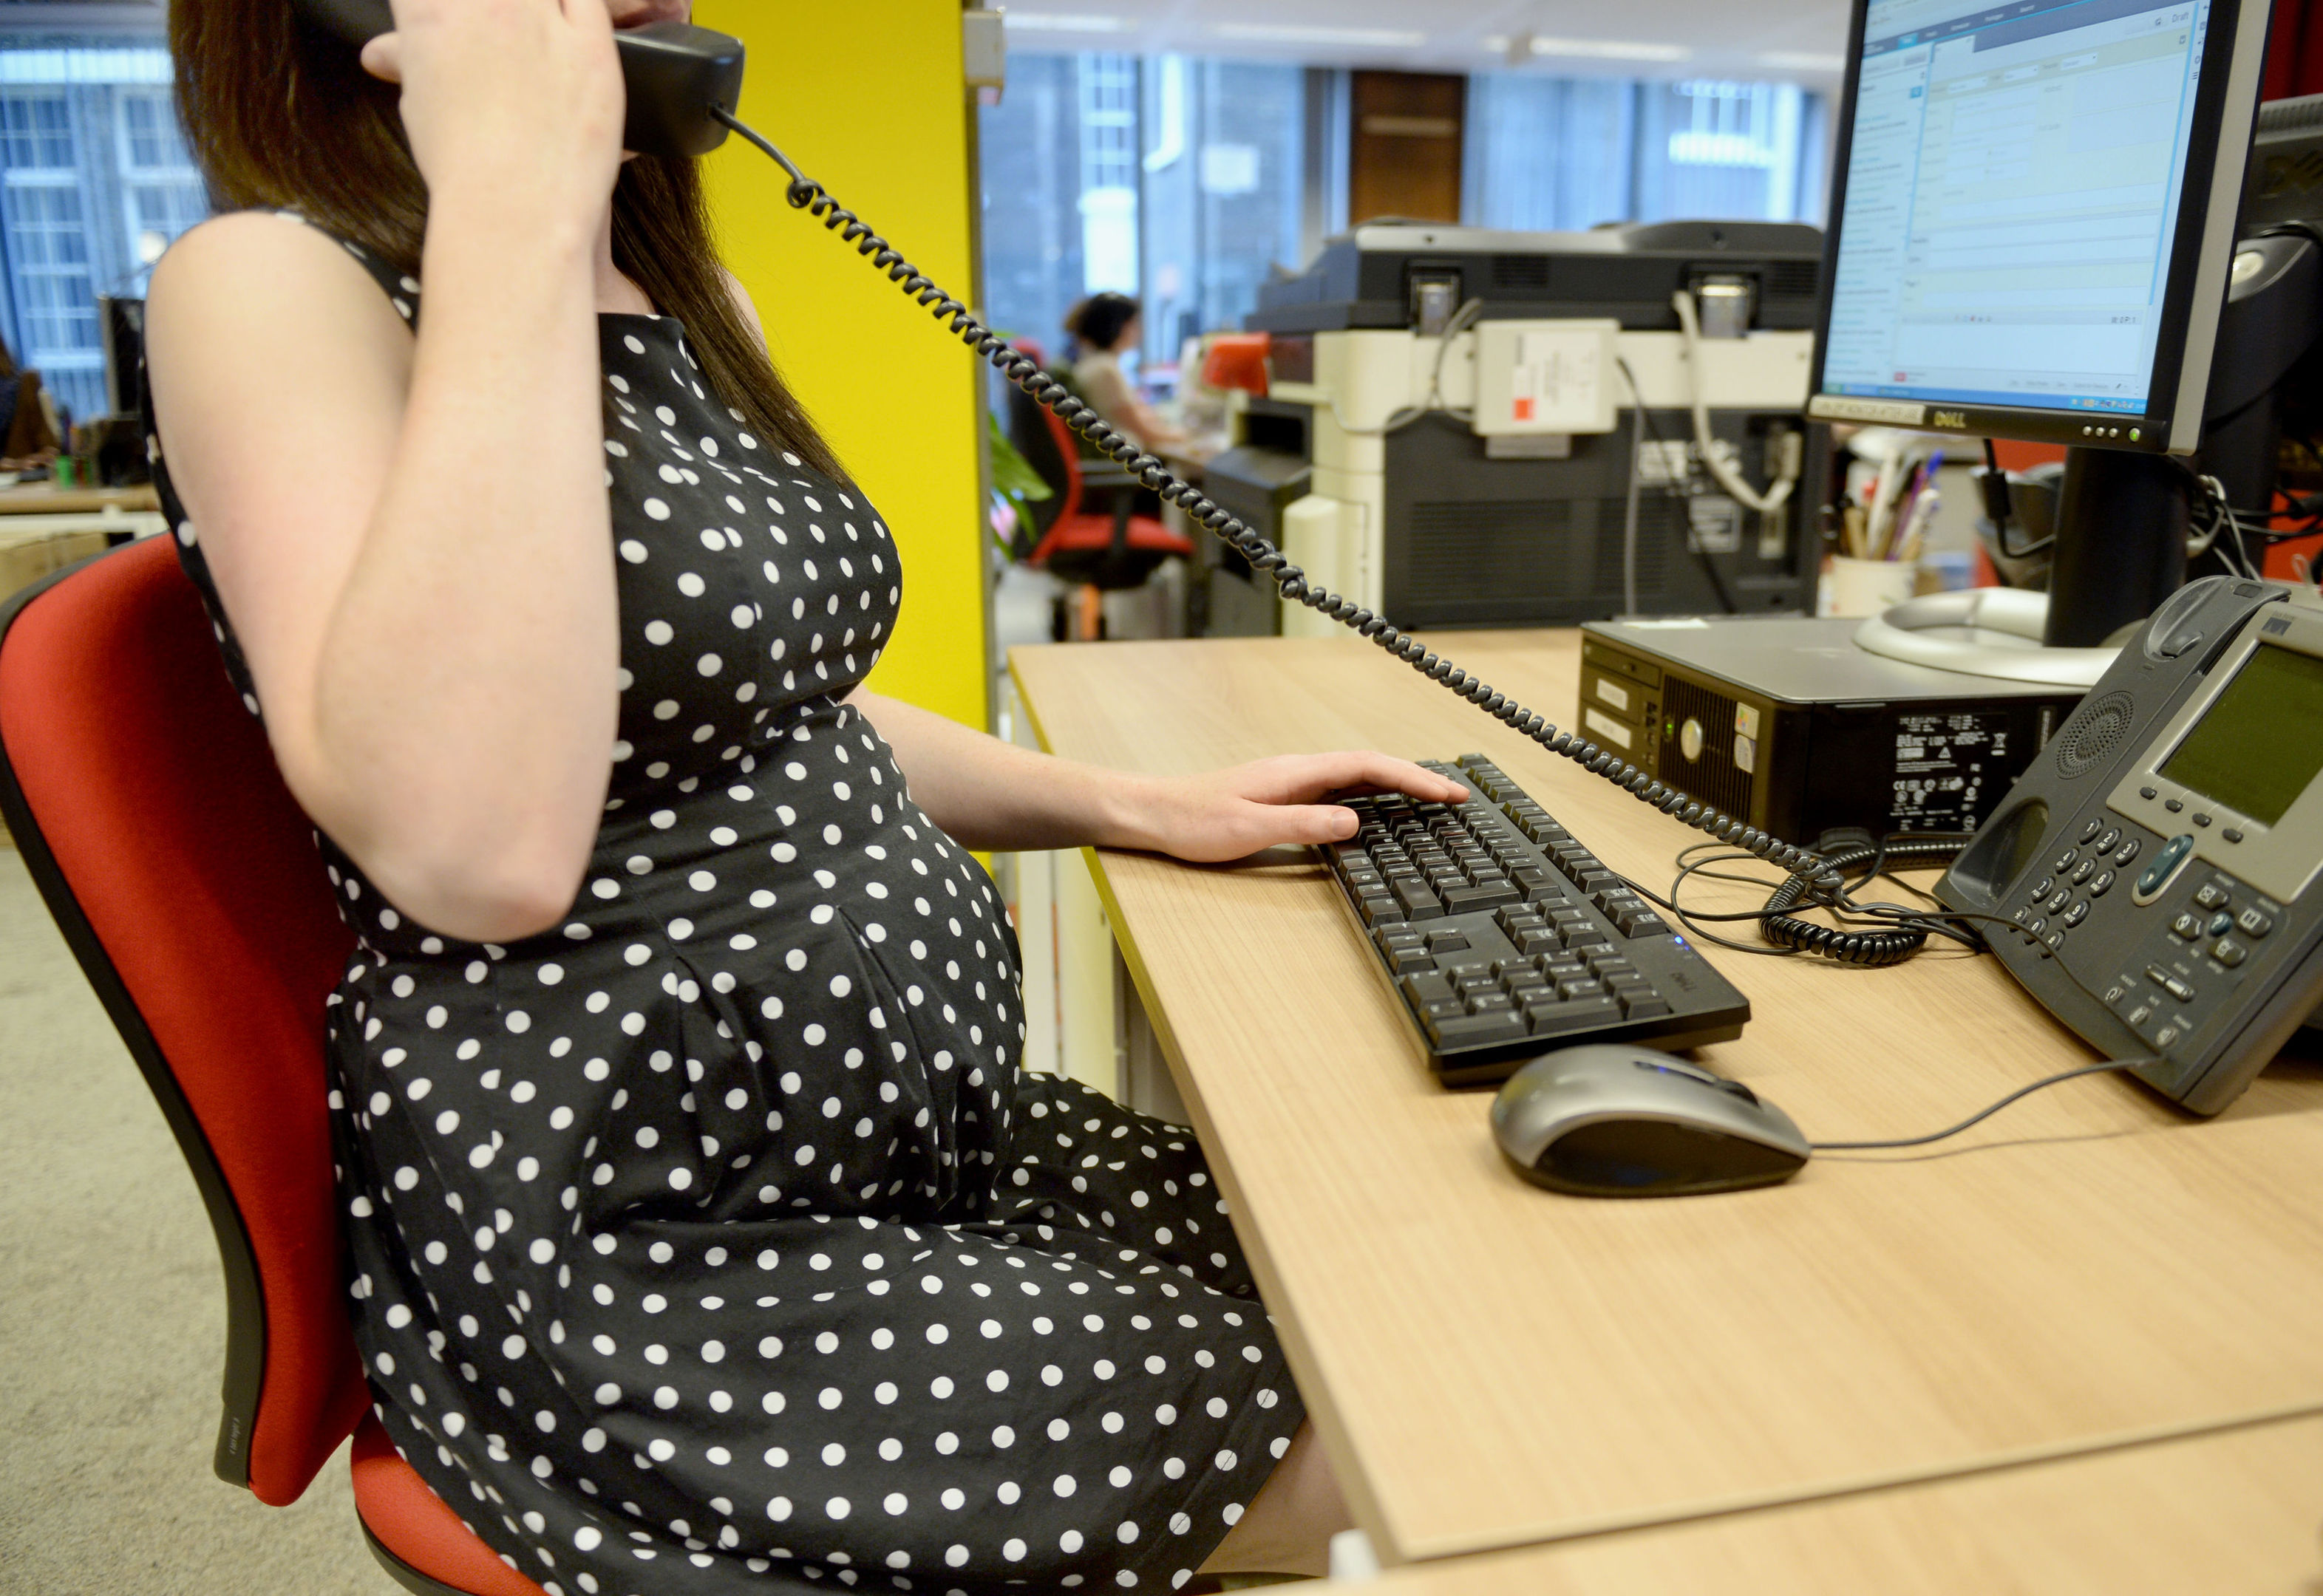 Urgent action is needed to give pregnant women and new mothers more protection at work a parliamentary report has said (Anthony Devlin/PA Wire)